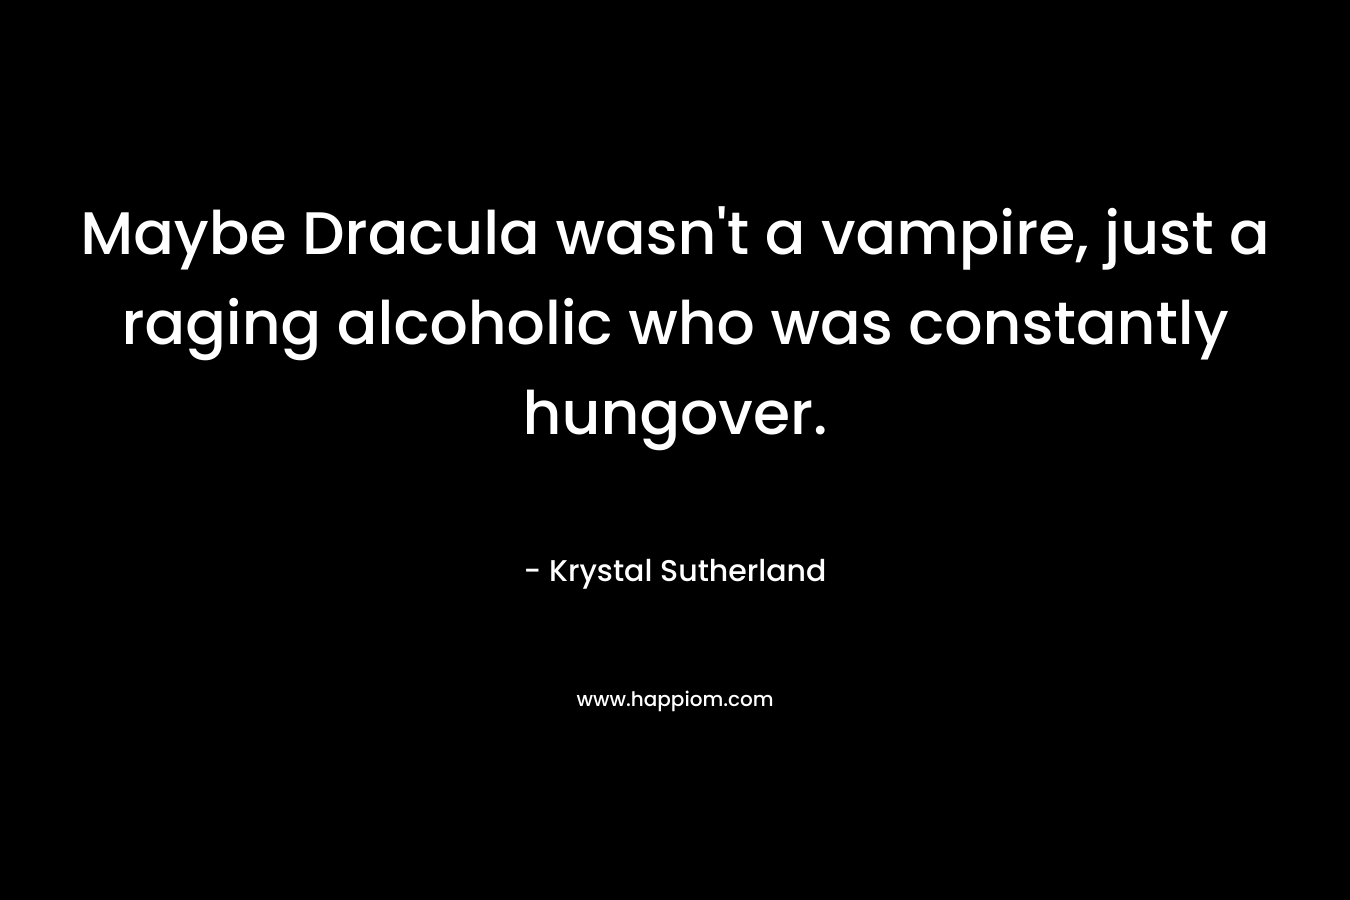 Maybe Dracula wasn’t a vampire, just a raging alcoholic who was constantly hungover. – Krystal Sutherland